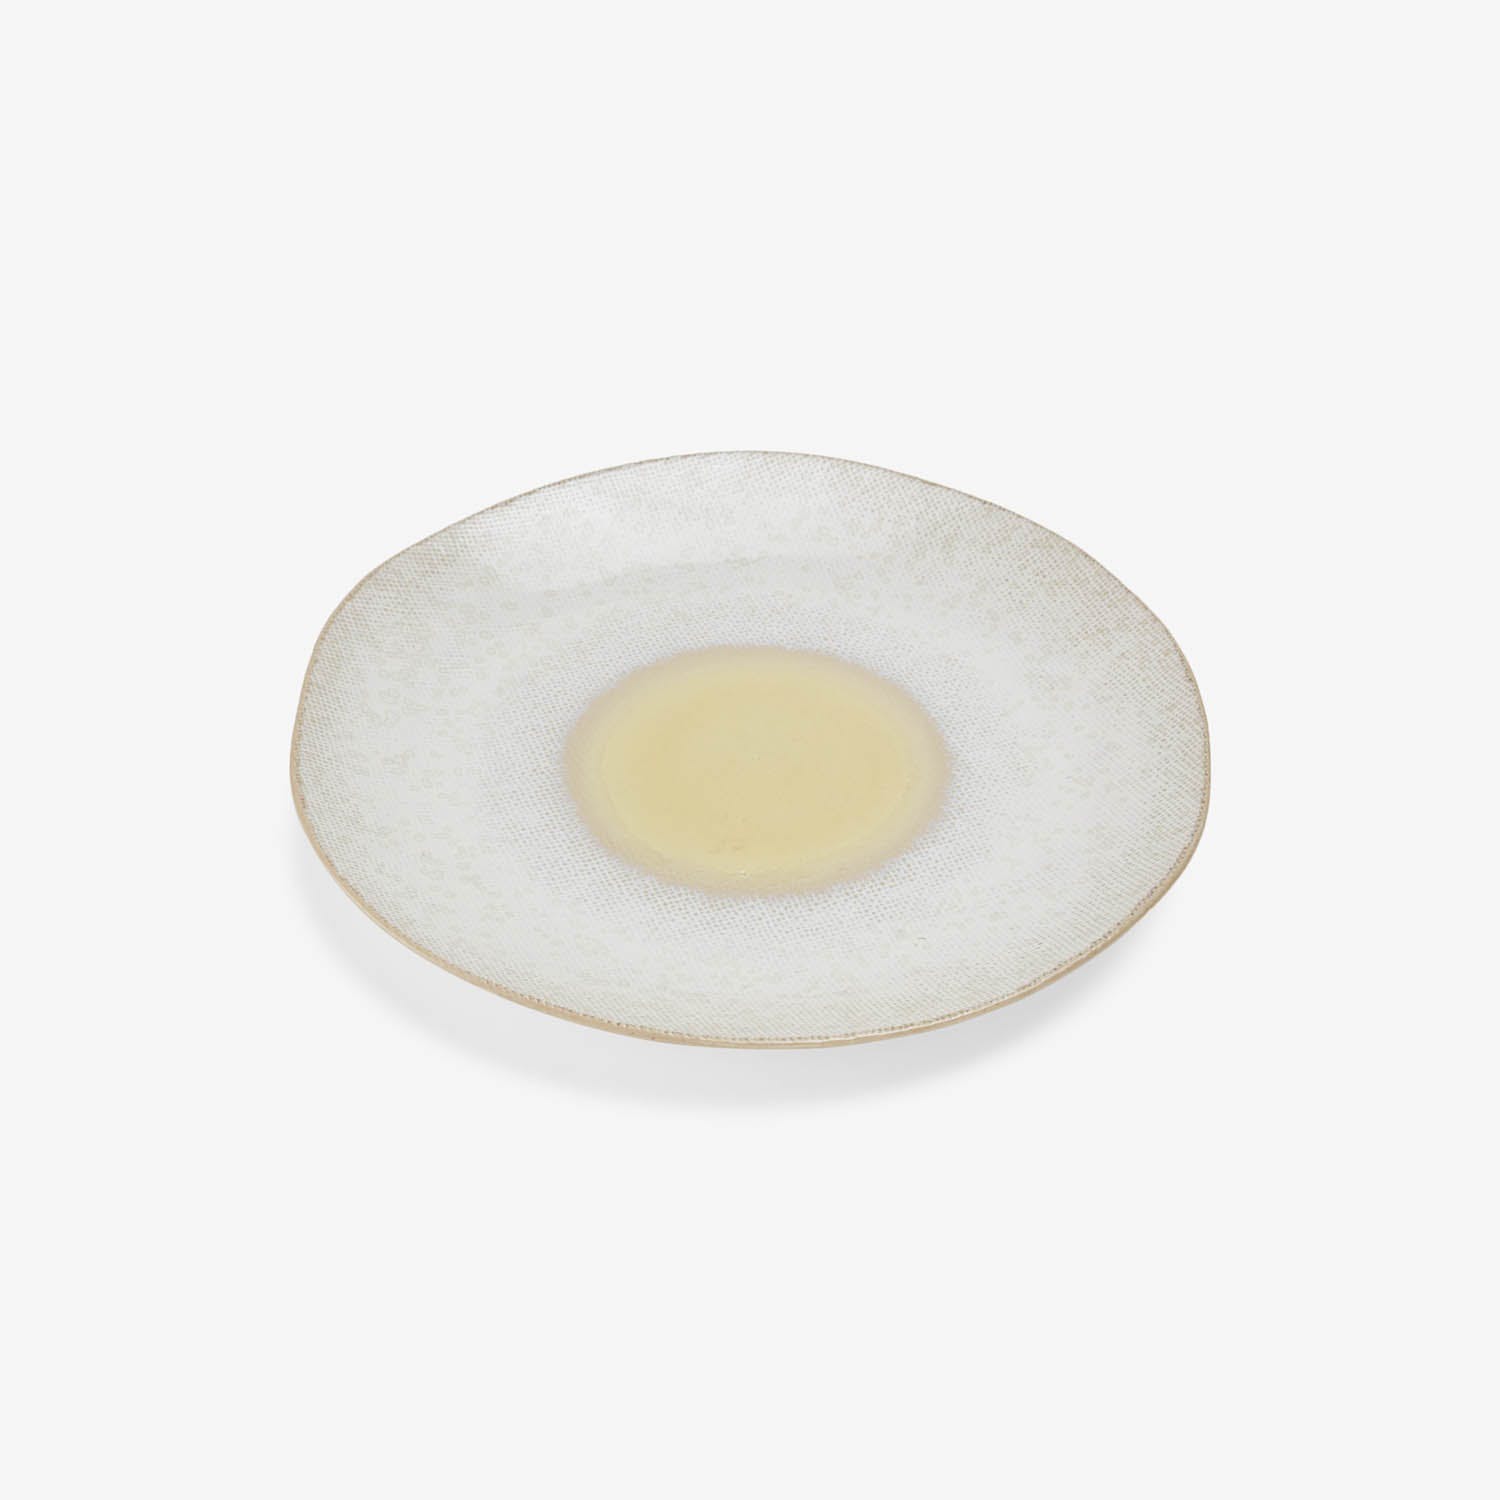 Handcrafted circular plate with textured glaze and distinct food placement area.